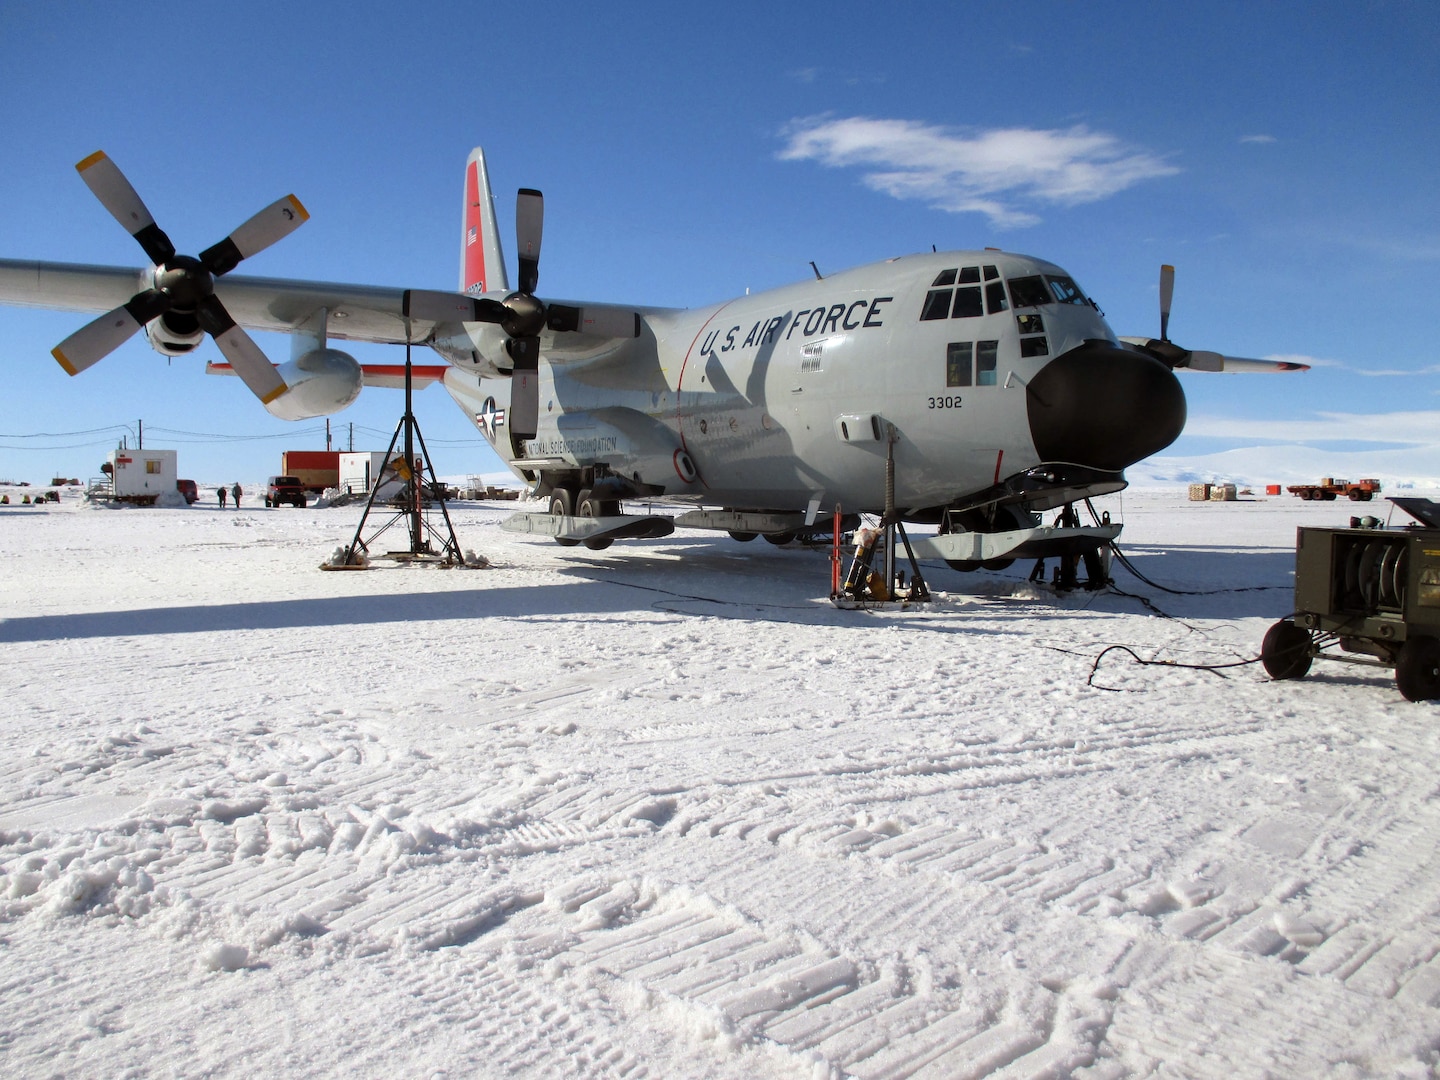 An LC-130 Skibird from the New York Air National Guard is jacked up on the frozen ice shelf of Pegasus Field Jan. 16, 2014, after aircrew discovered a landing gear issue. The maintenance crews of the 109th Airlift Wing do not have hangars to work out of while deployed to Antarctica for Operation DEEP FREEZE and must work in the elements and handle unique challenges nearly every day.